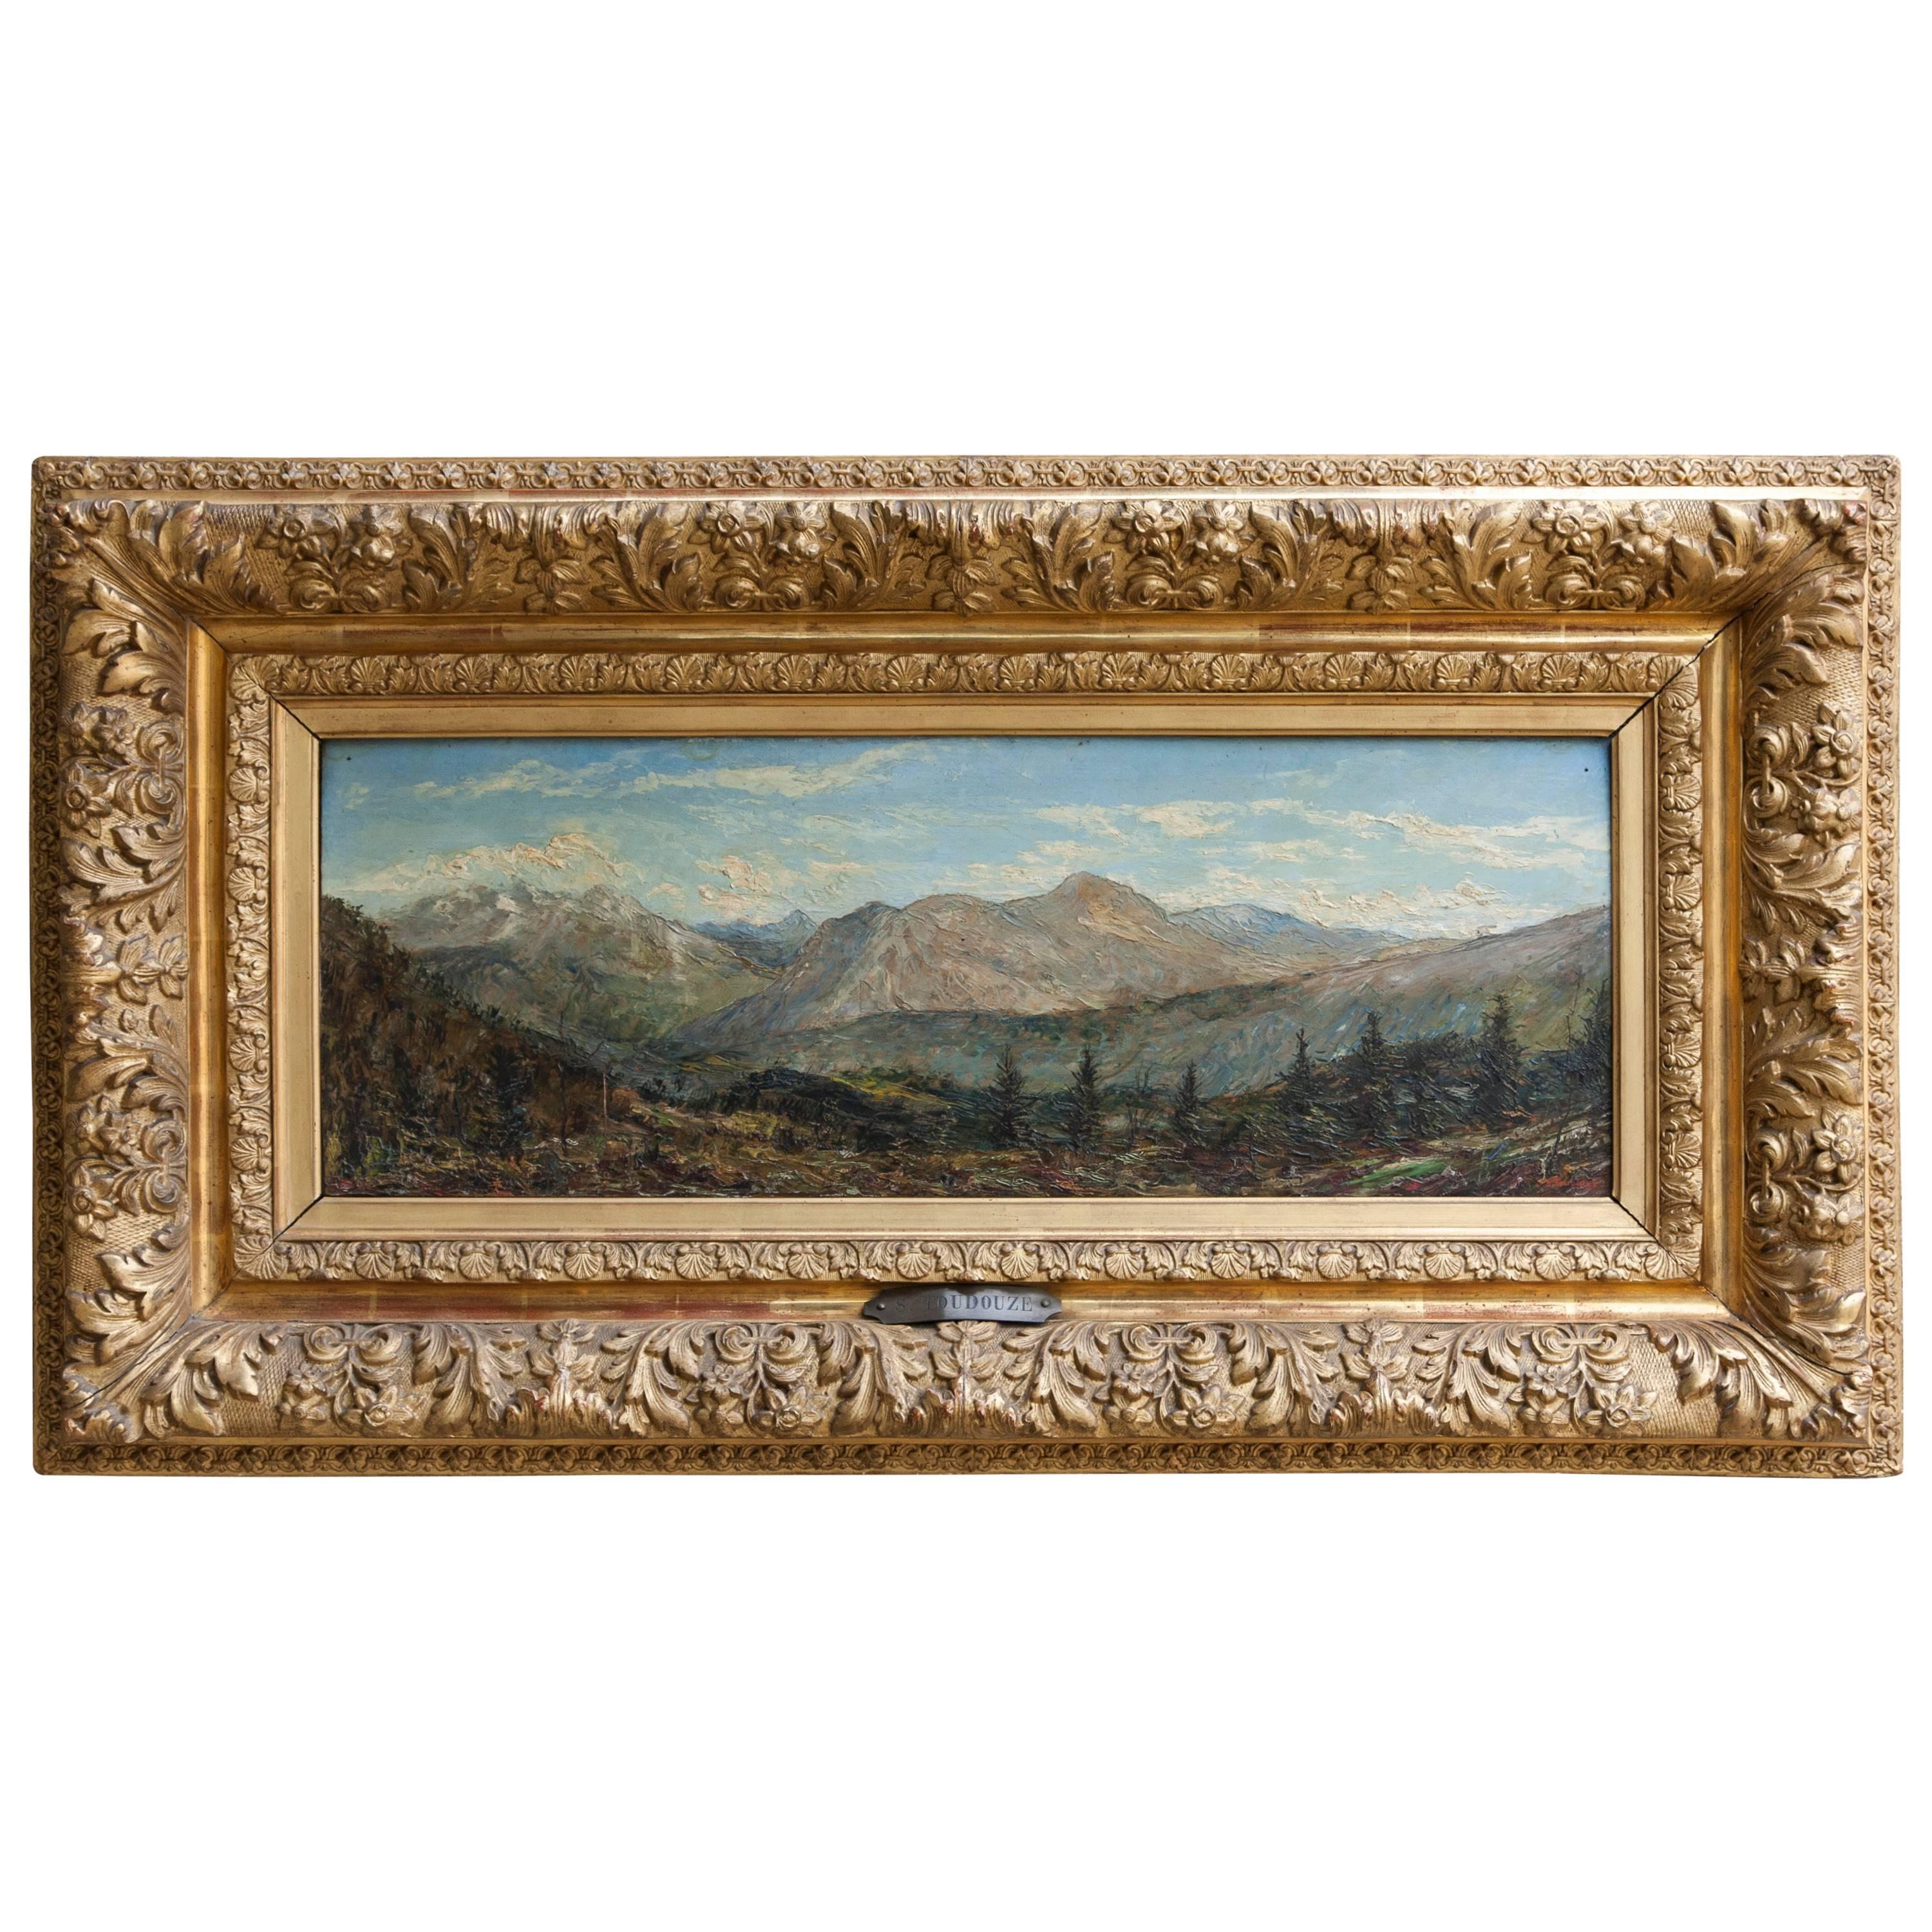 Signed Original 19th Century Landscape Oil Painting in Museum Frame by S. Toudou